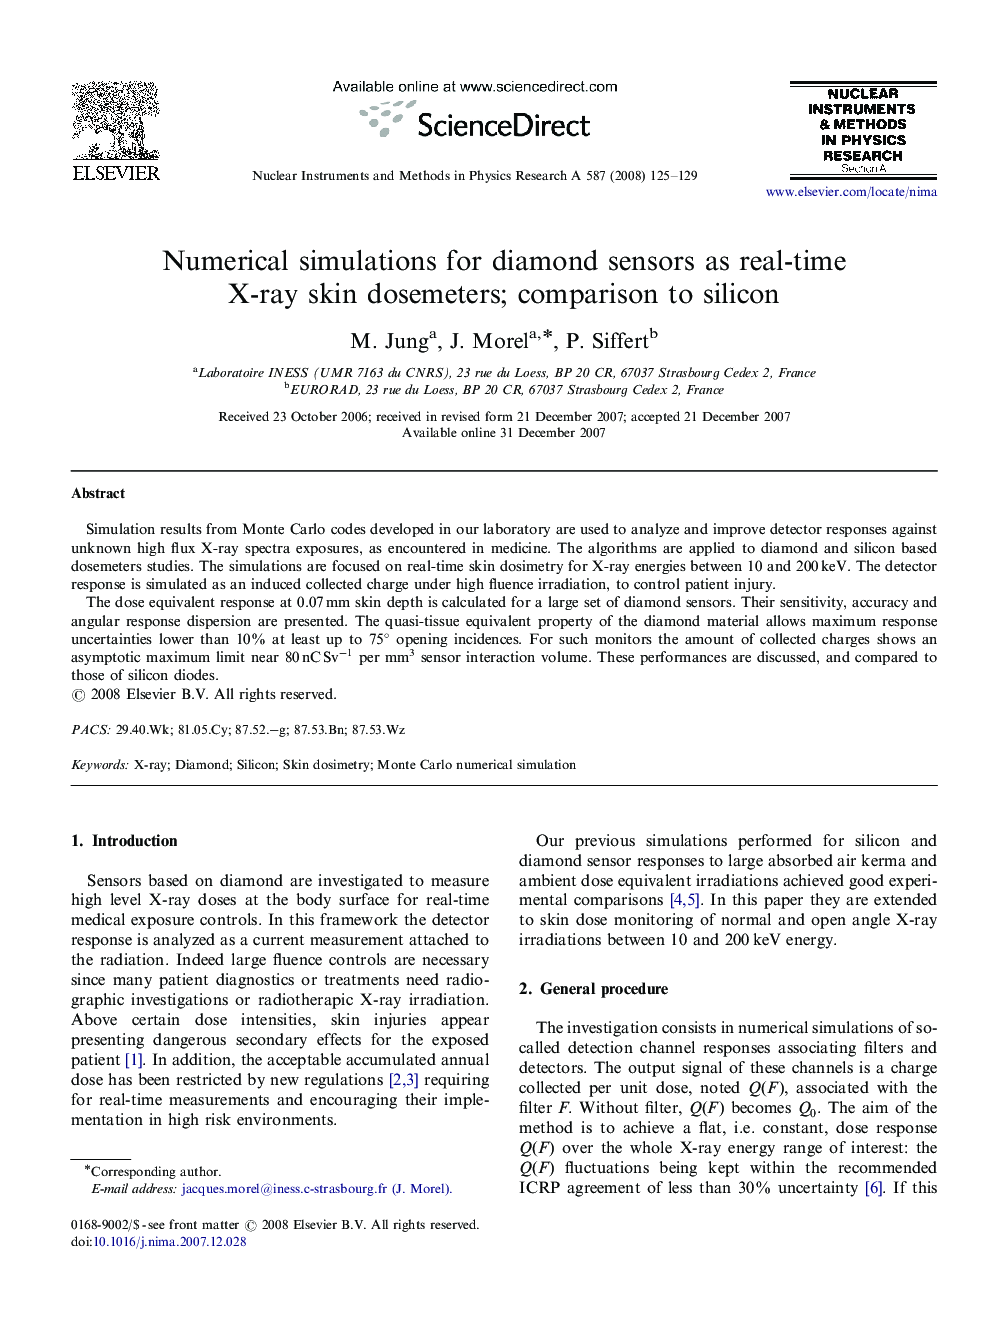 Numerical simulations for diamond sensors as real-time X-ray skin dosemeters; comparison to silicon